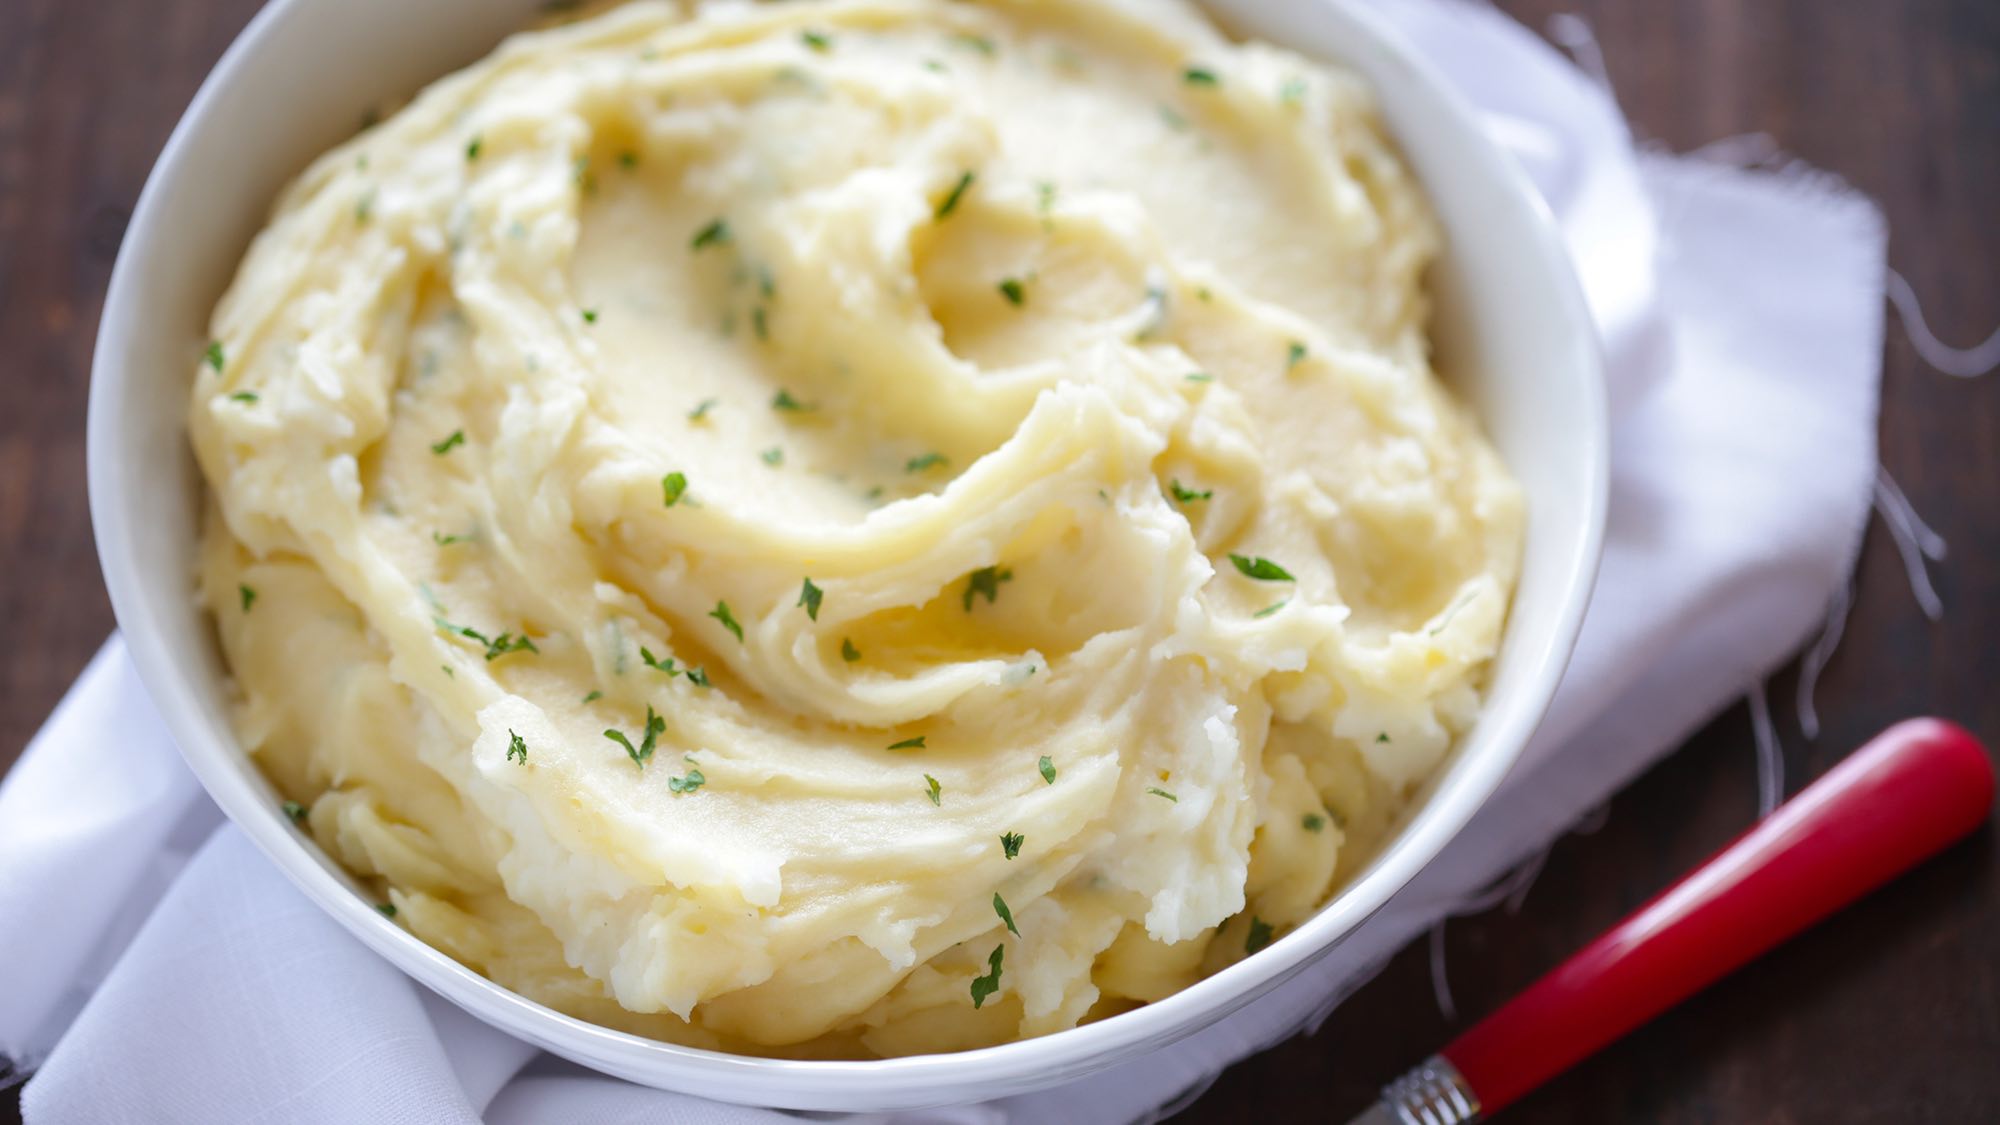 garlic-cheese-mashed-potatoes-gimme-some-oven.jpg